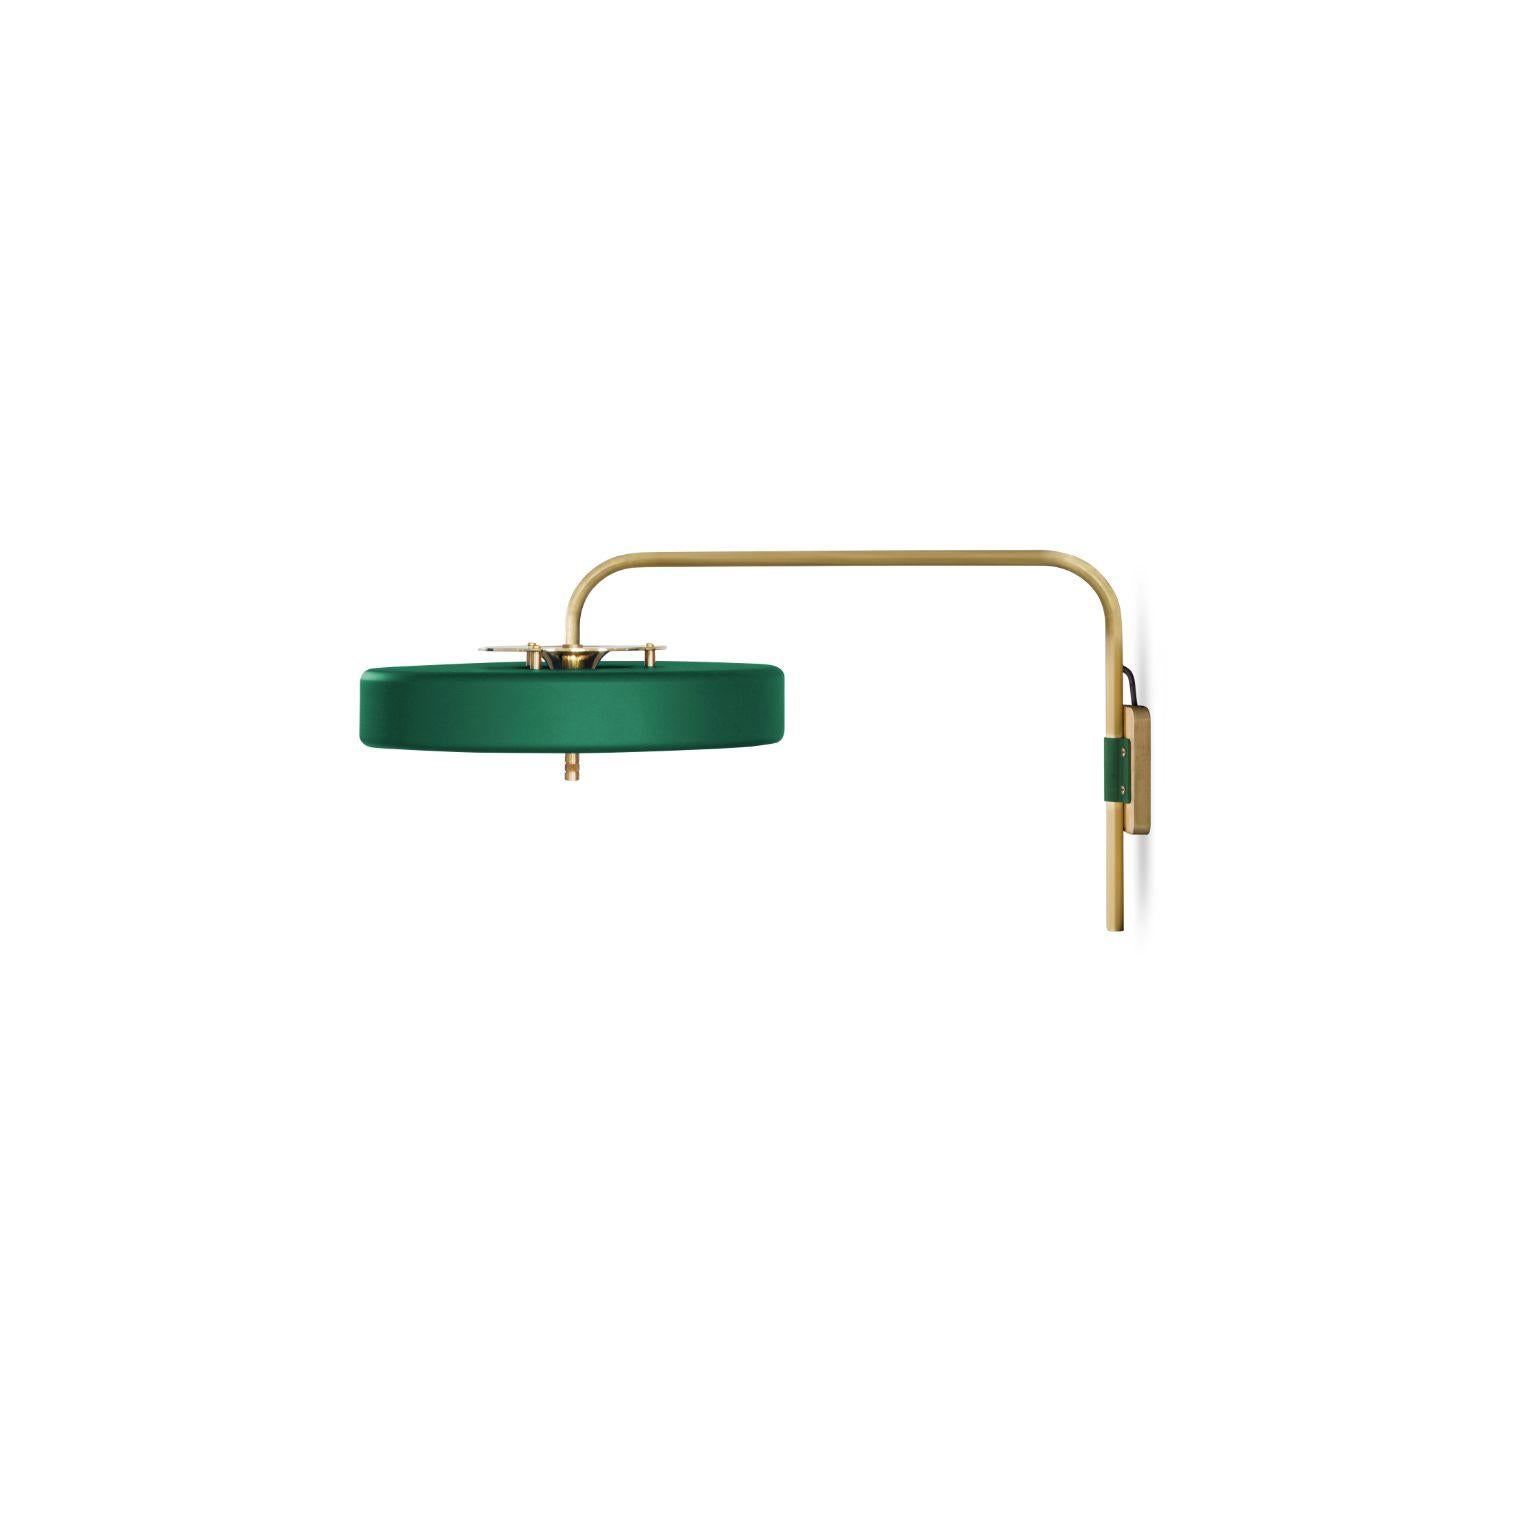 Revolve wall light - Polished brass - Green by Bert Frank
Dimensions: 31 x 63 x 35 cm
Materials: Brass, steel

Available in brushed brass

Flush-fitting opal glass shade with central dome of polished marble – white Carrara or green Guatemala – held